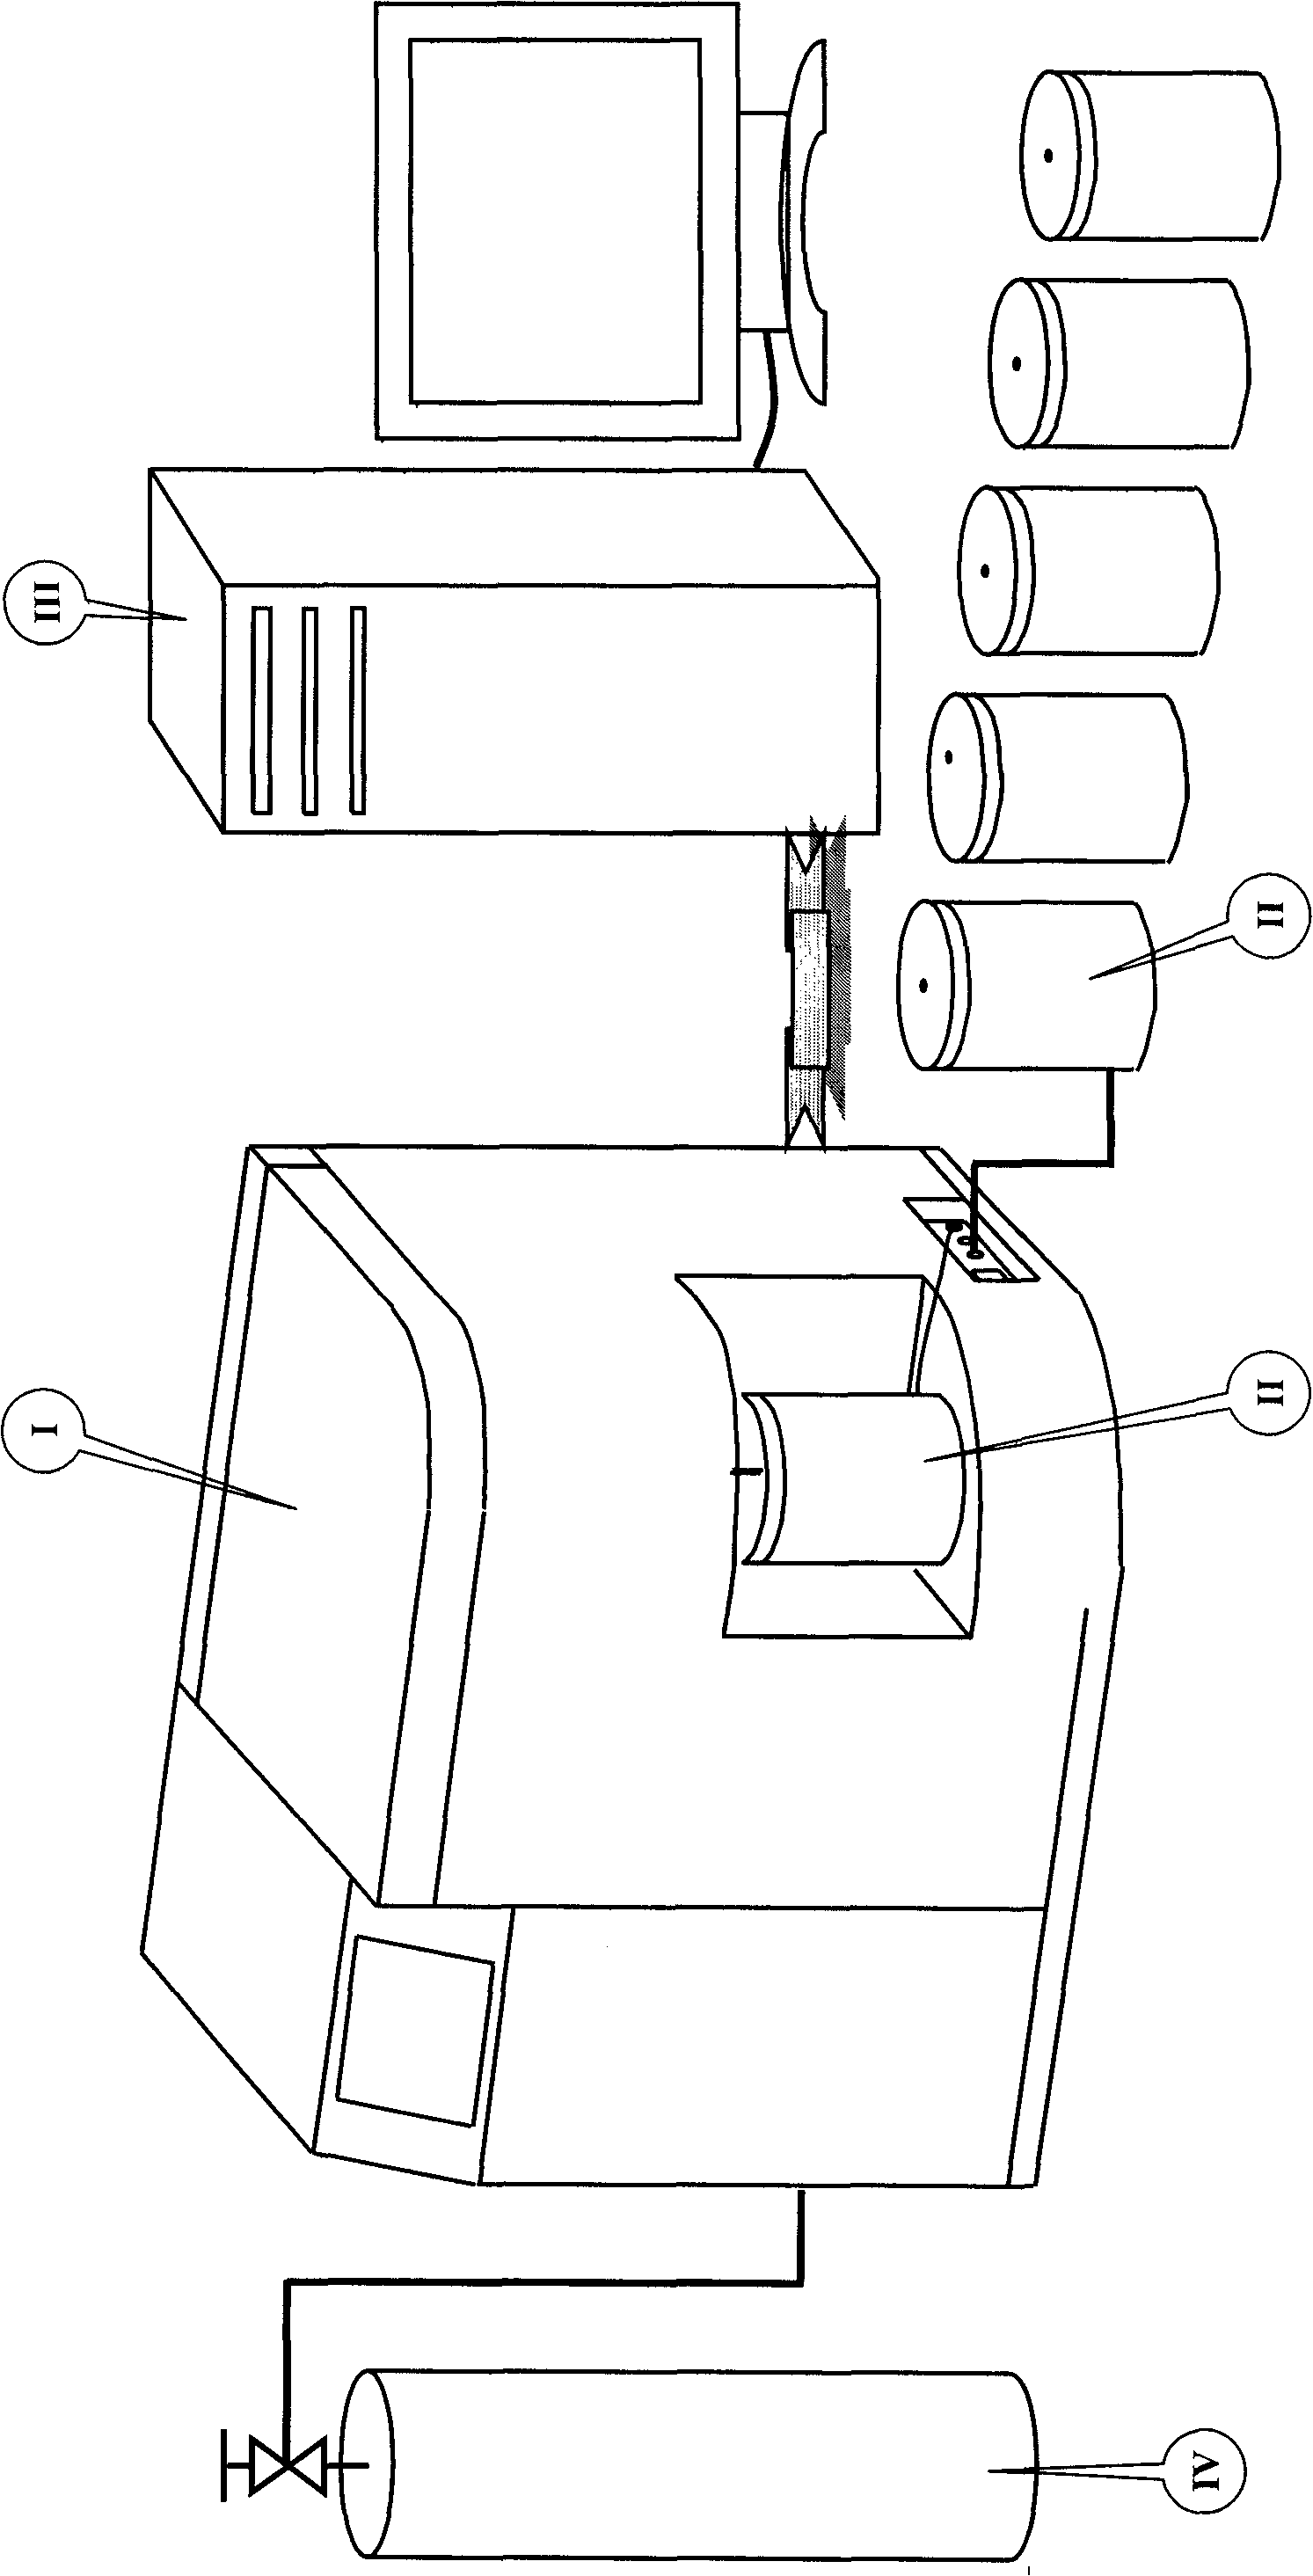 Olfactory analog instrument and qualitative, quantitative and simultaneous analysis method of various gases